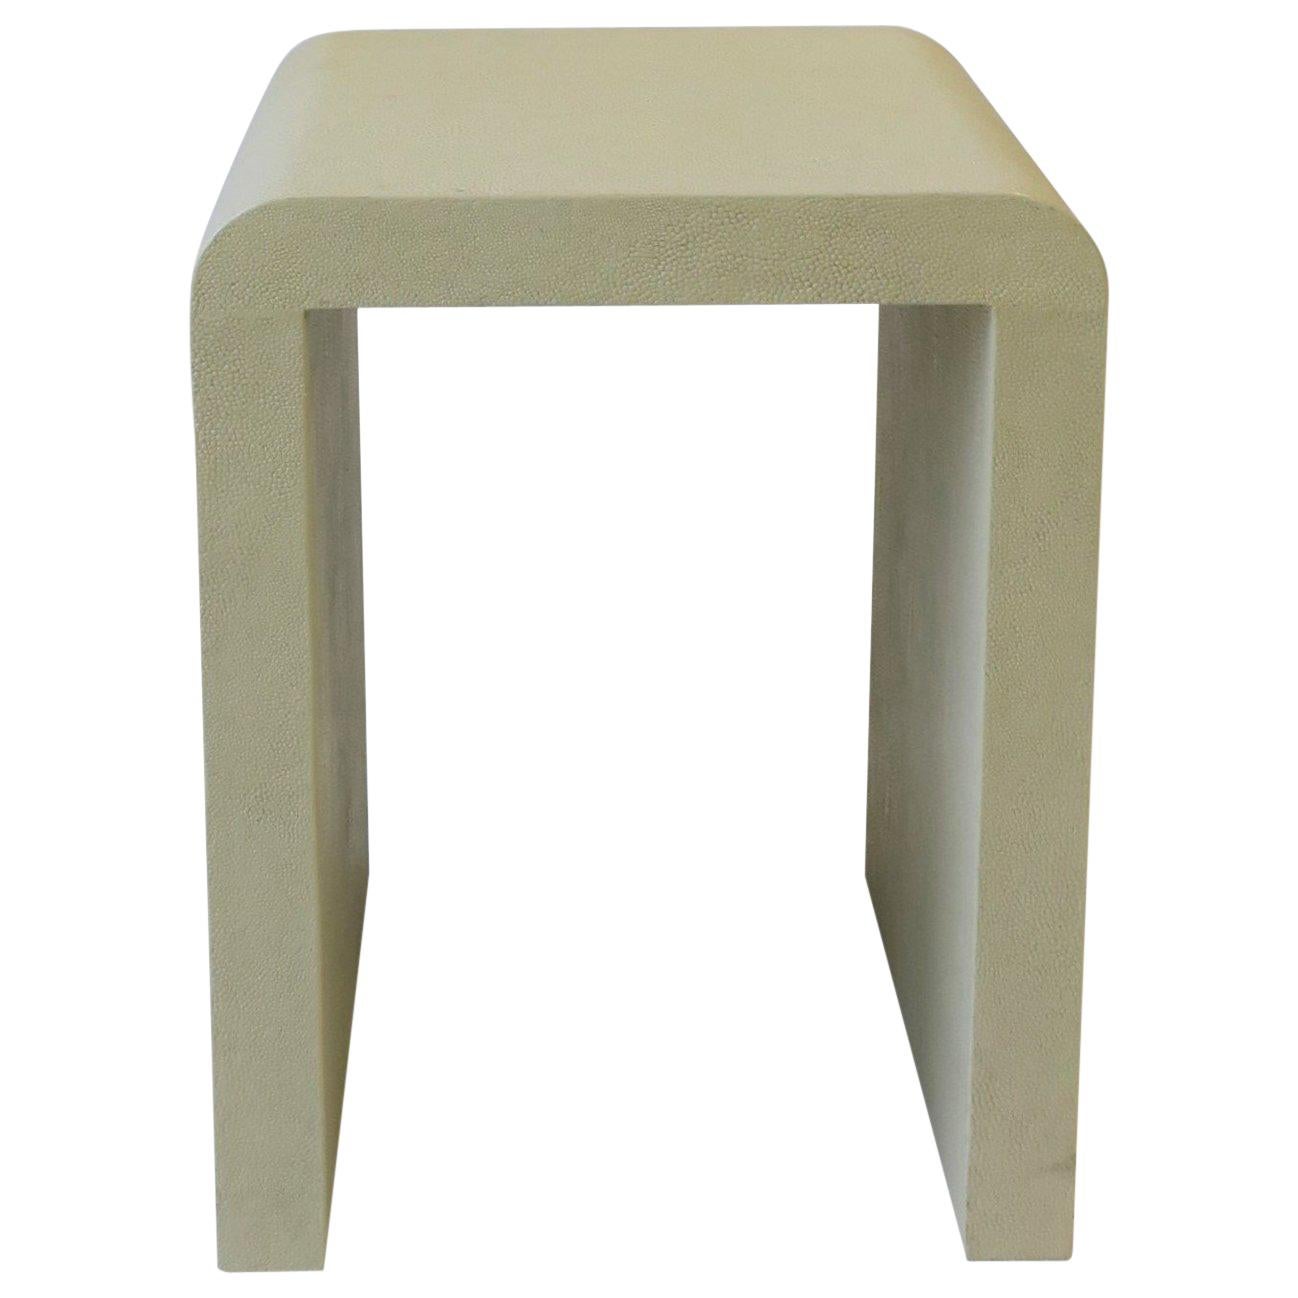 Small Modern Shagreen Side Table with Waterfall Edge